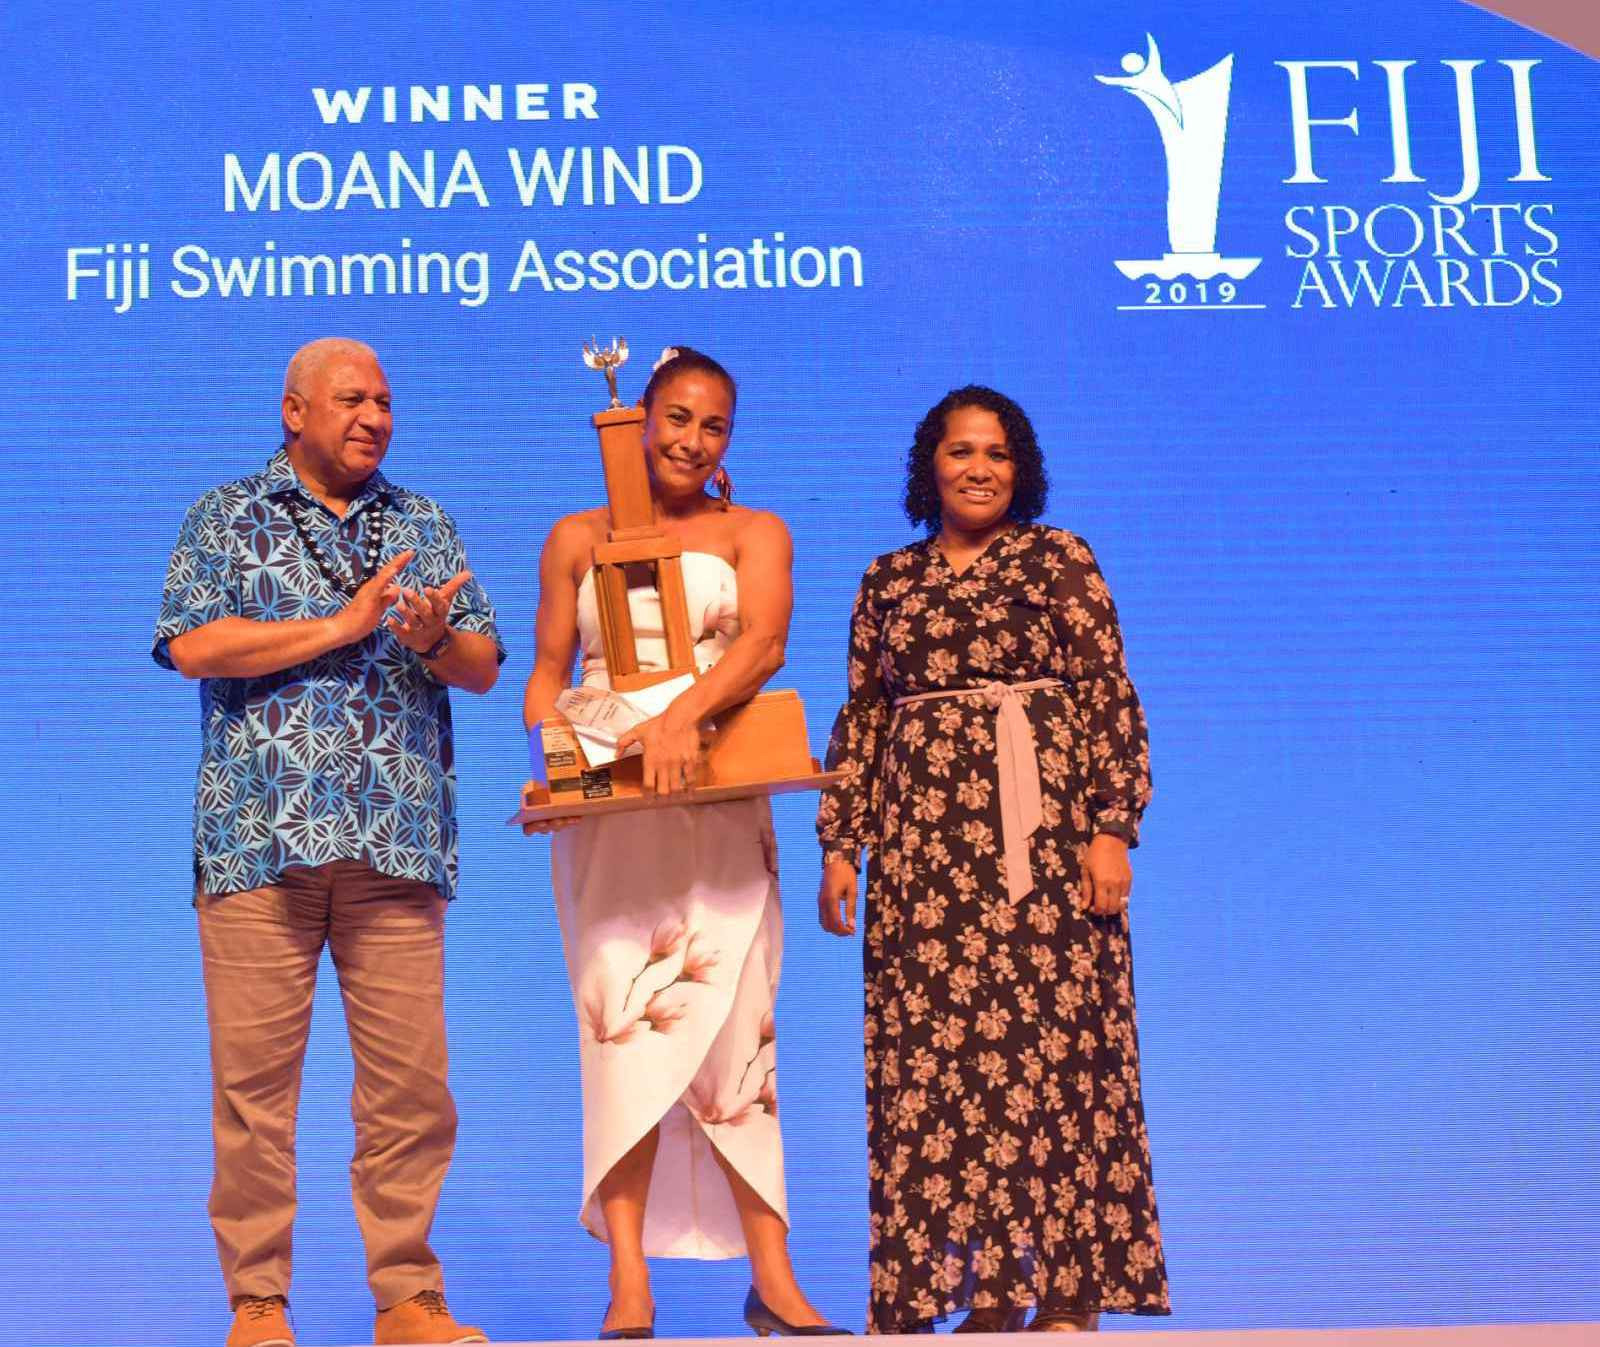 Swimmer Moana Wind received the sportswoman of the year accolade at the Fiji Sports Awards ©Facebook